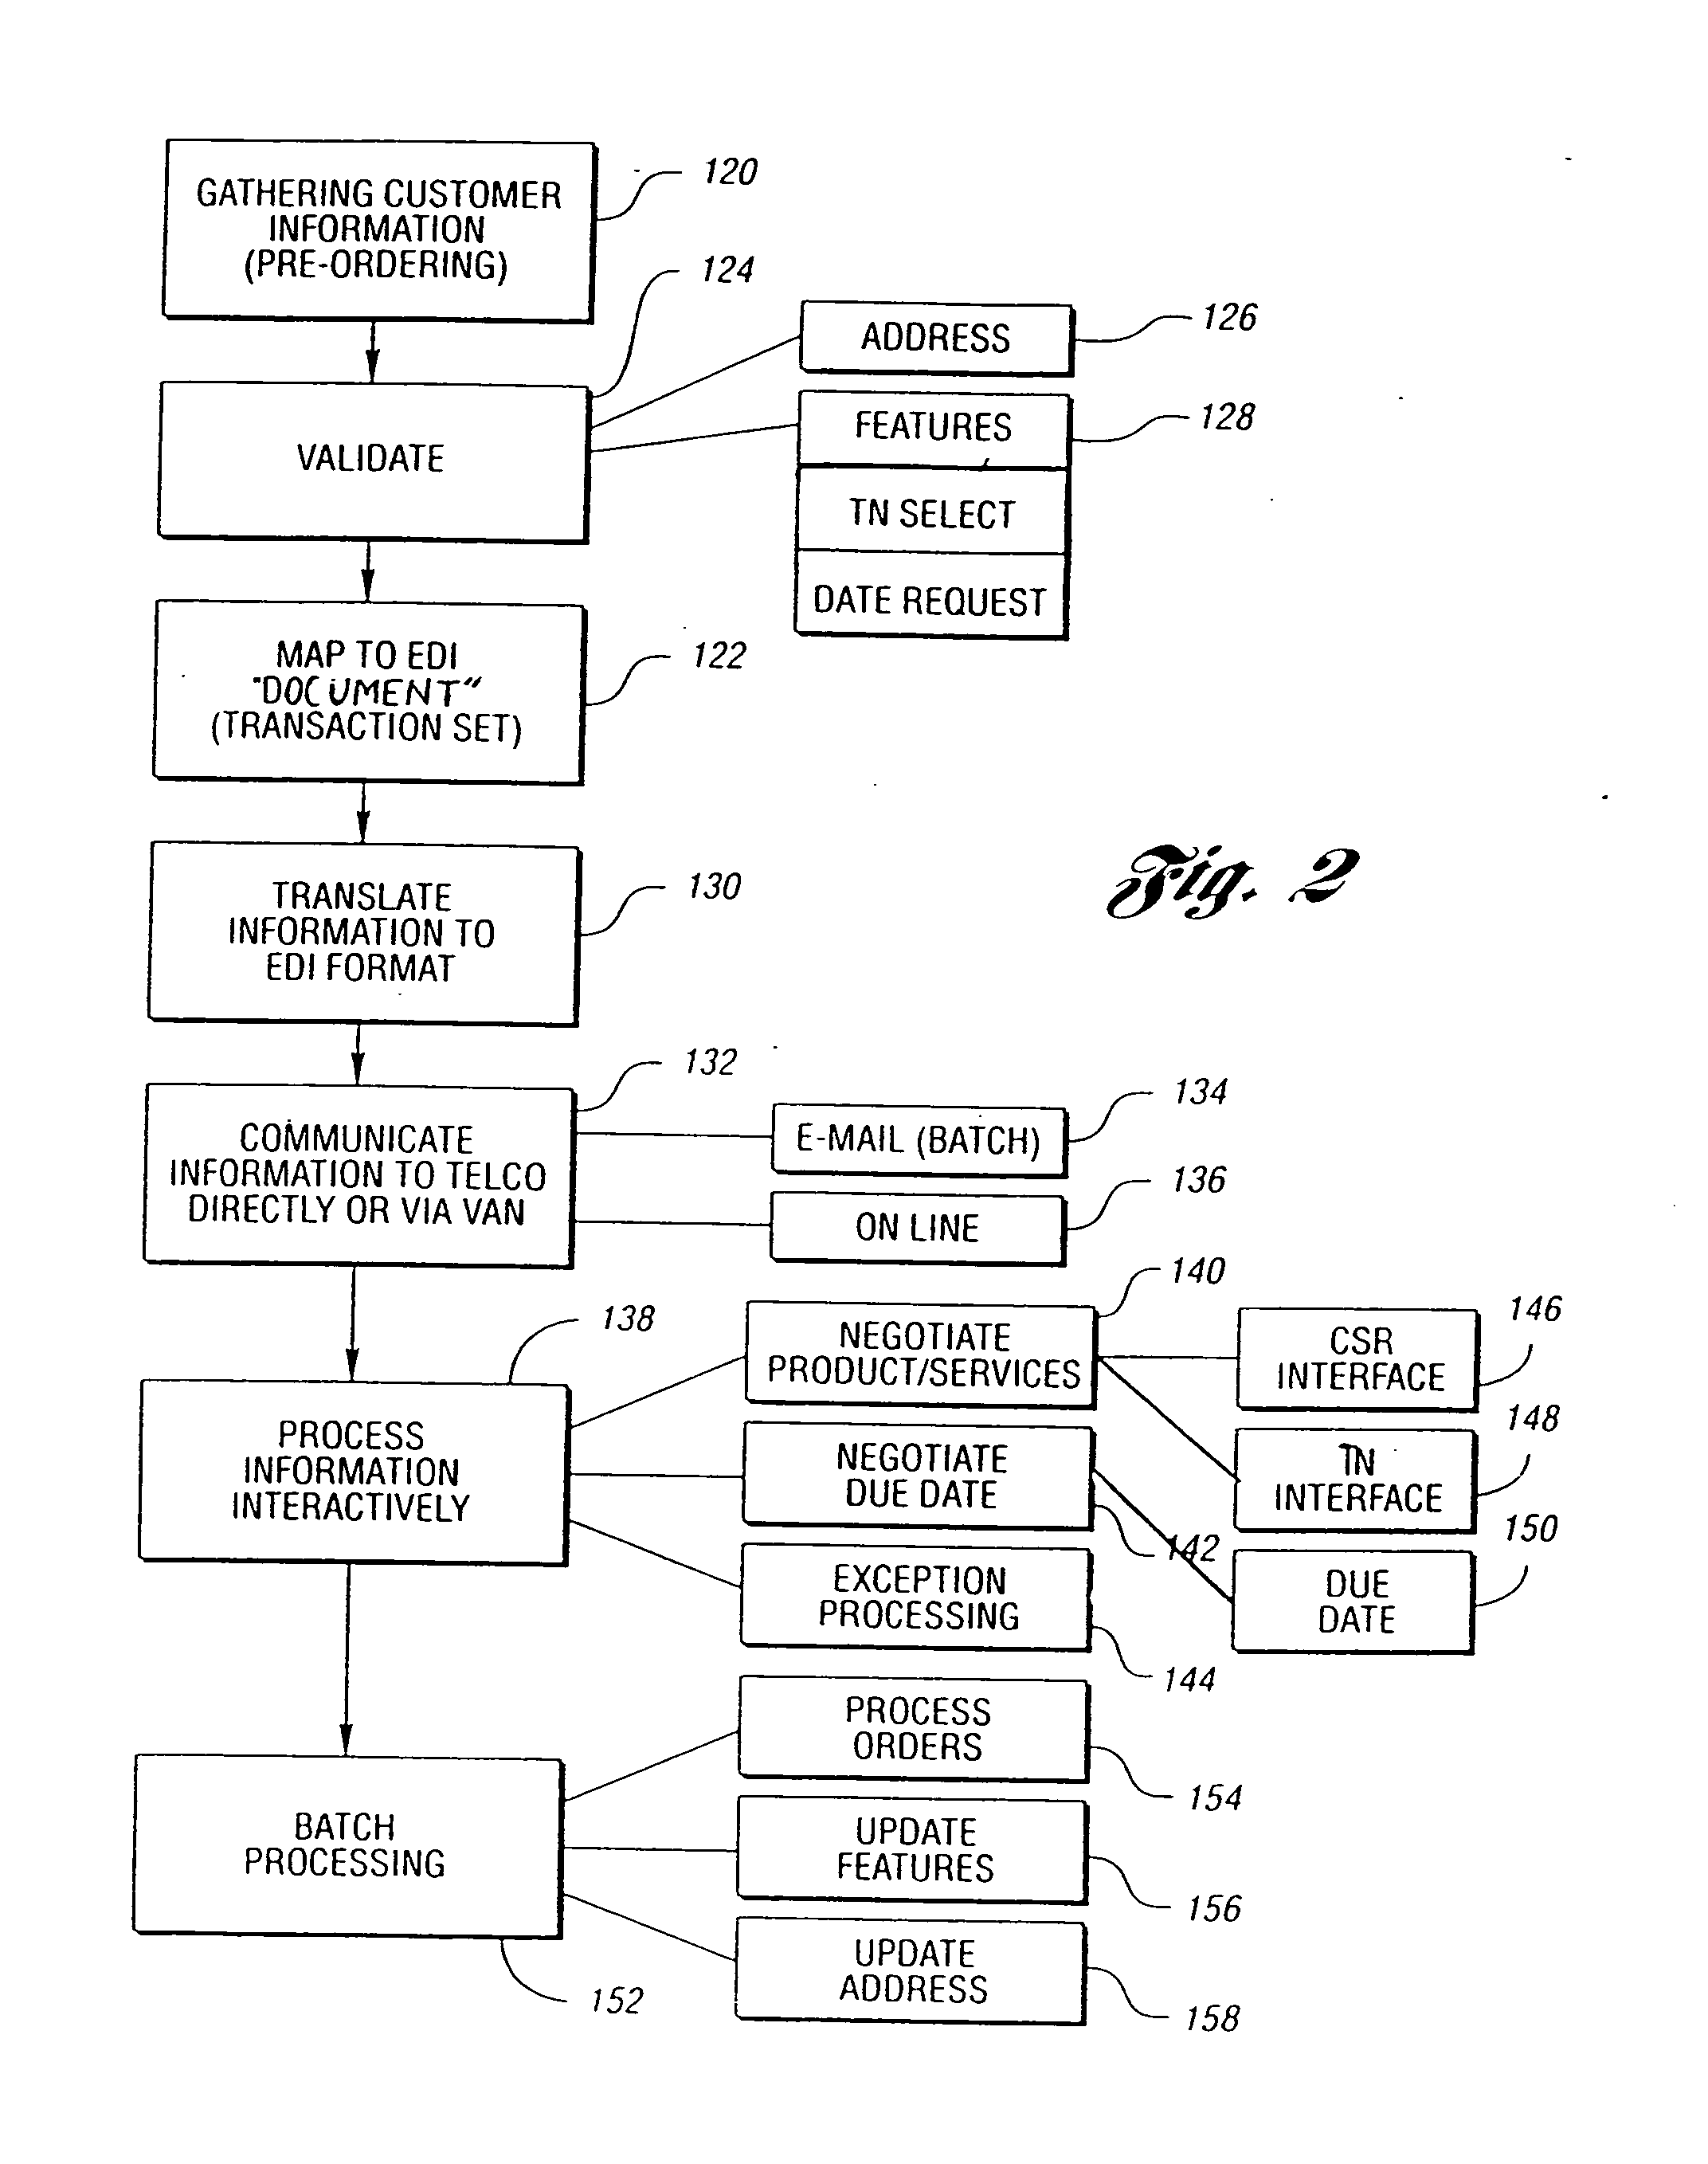 Transaction sets for automated electronic ordering of telecommunications products and services